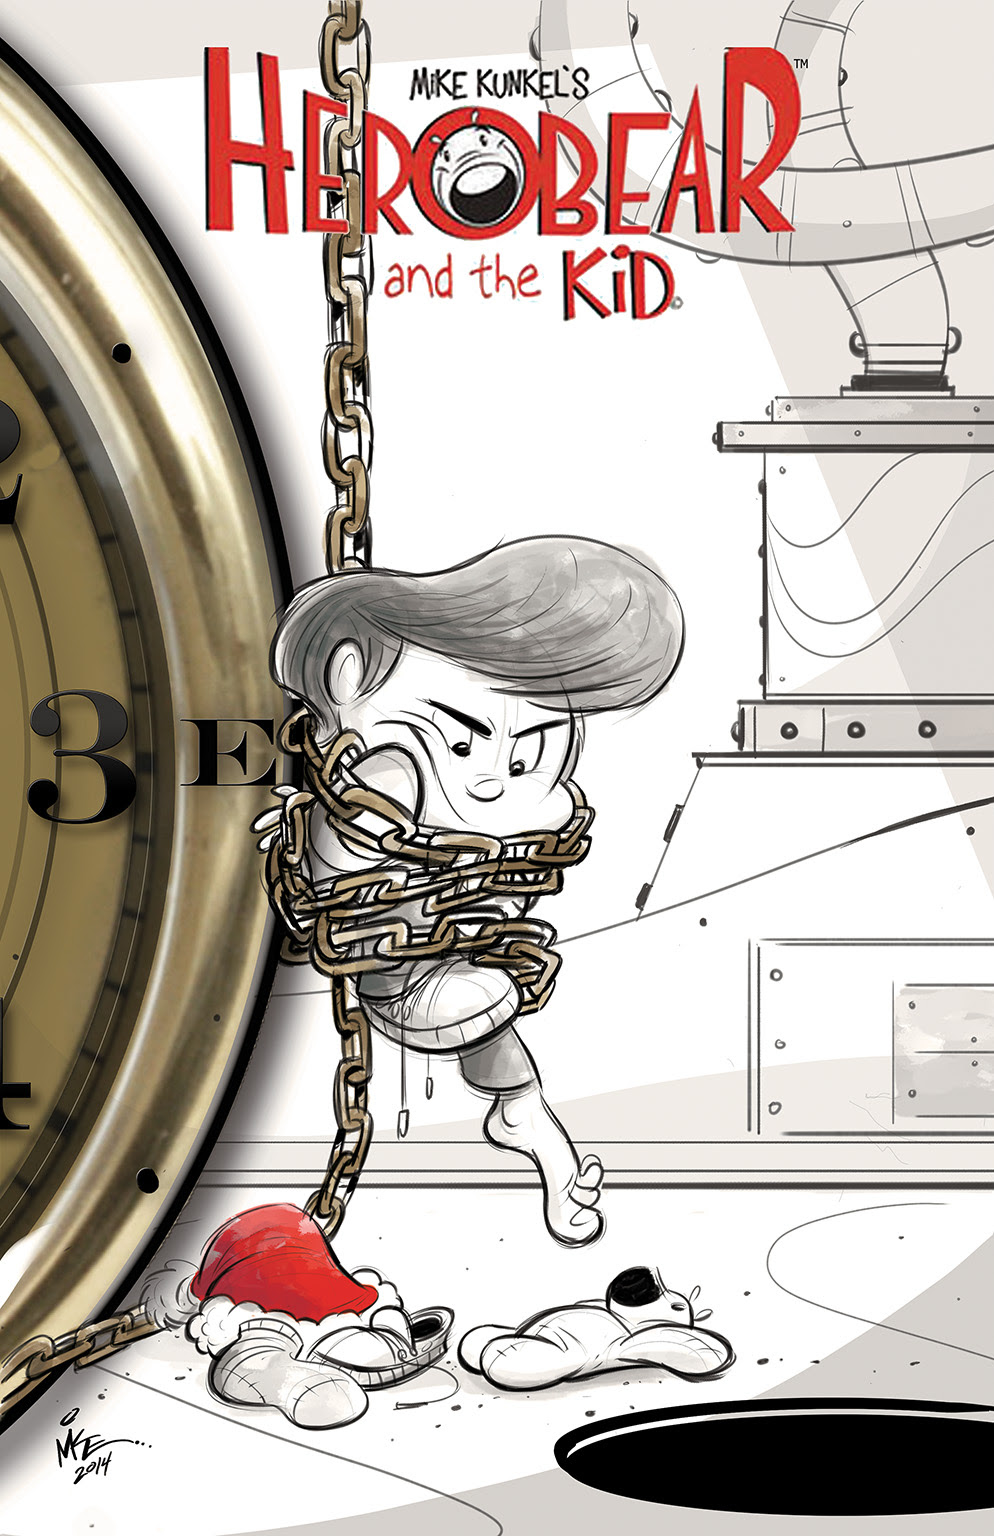 HEROBEAR AND THE KID: SAVING TIME #3 Cover by Mike Kunkel